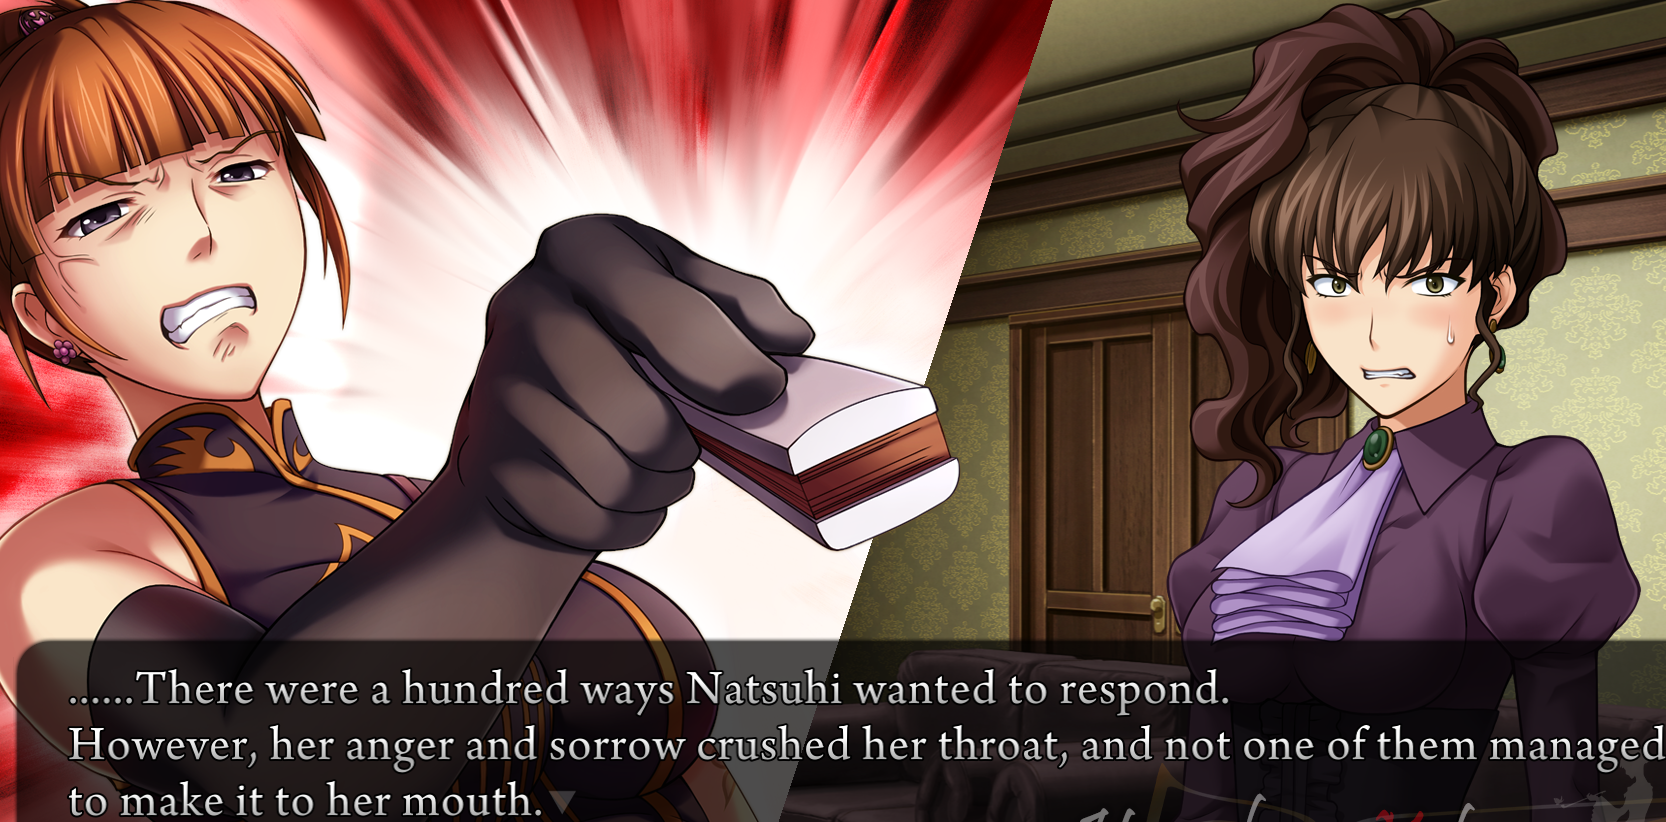 A dramatic half-screen CGI of a furious Eva pointing her fan at Natsuhi, who is wearing a purple dress and a lilac cravat without the One Winged Eagle. The narration says “…There were a hundred ways Natsuhi wanted to respond. However, her anger and sorrow crushed her throat, and not one of them managed to make it to her mouth.”